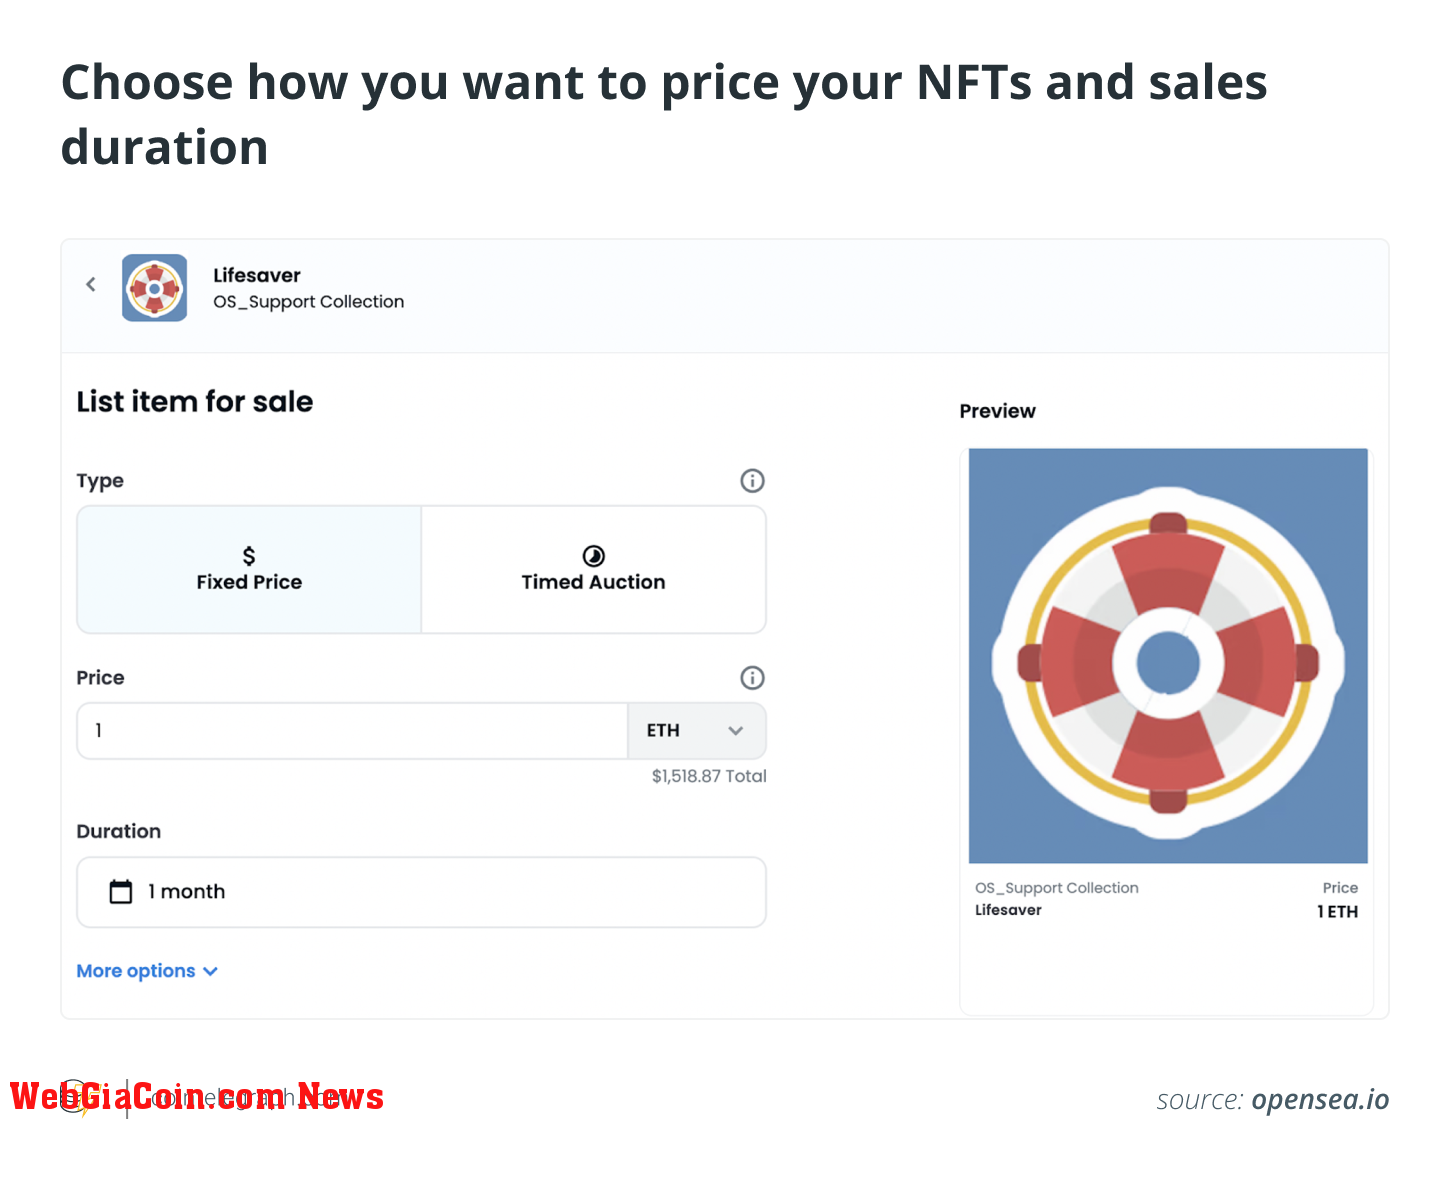 Choose how you want to price your NFTs and sales duration